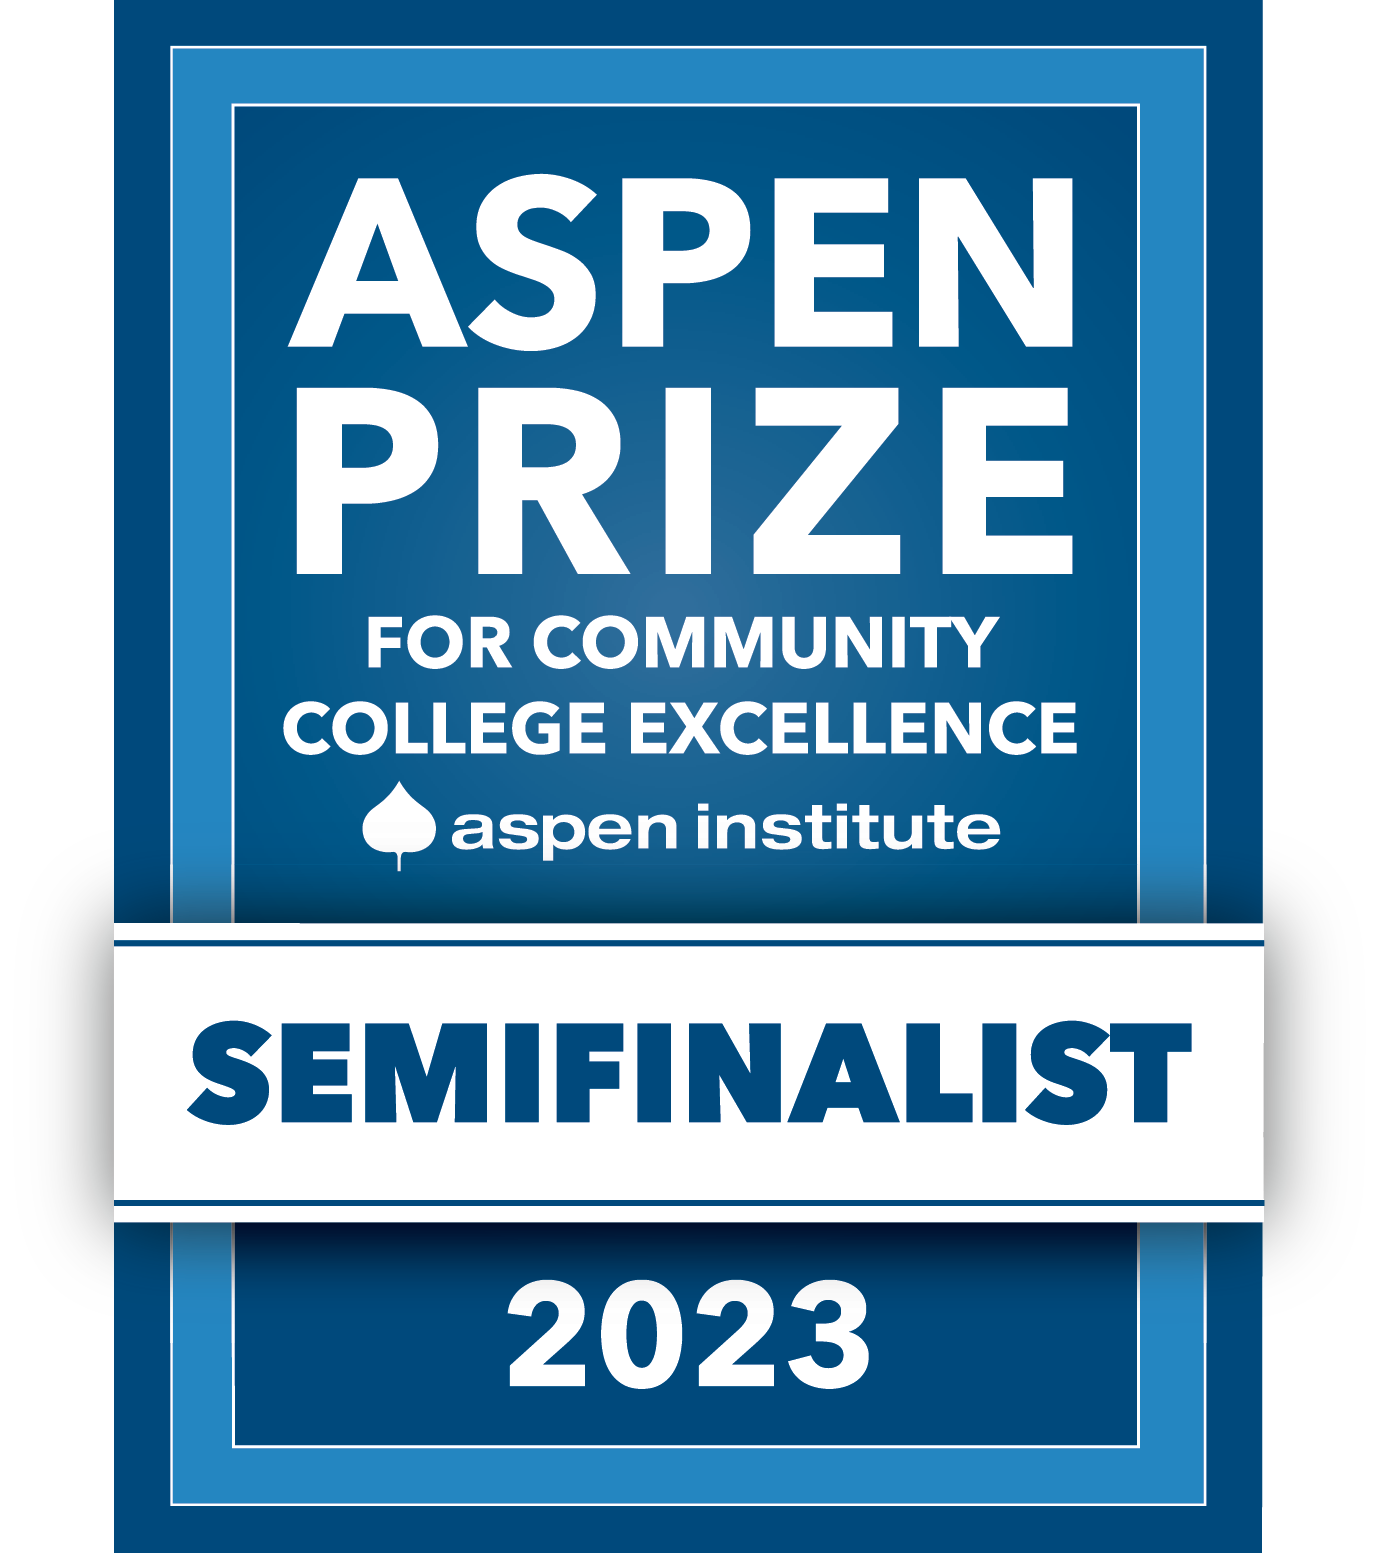 Aspen Prize for Community College Excellence Semifinalist 2023